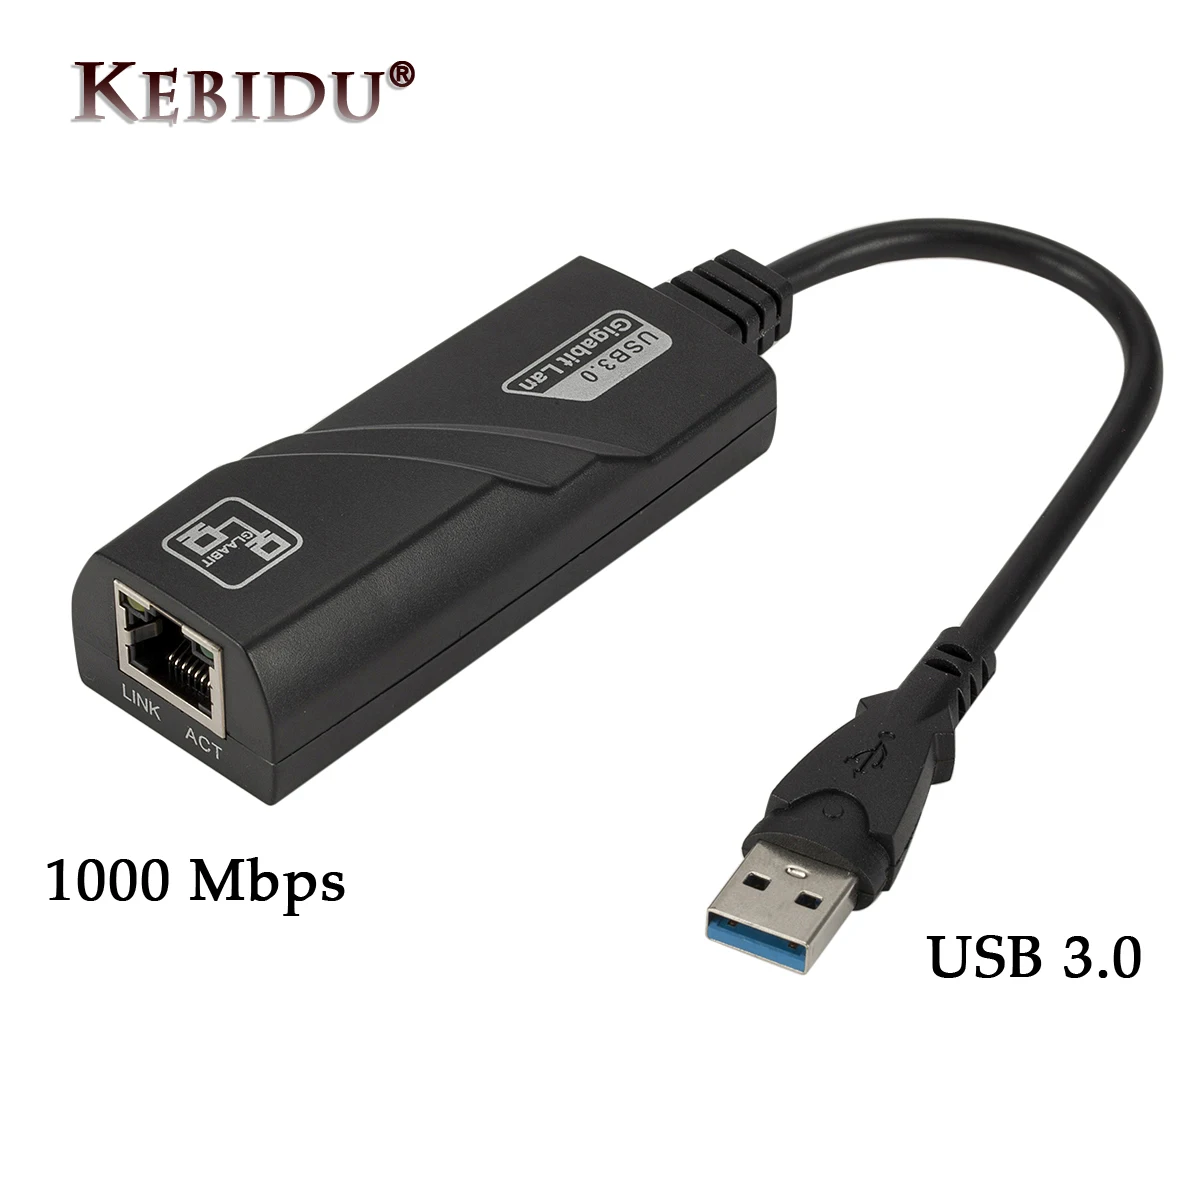 New 10/100/1000 Mbps USB 3.0 To Gigabit Ethernet RJ45 LAN Network Adapter Card For PC Wholesales | Компьютеры и офис